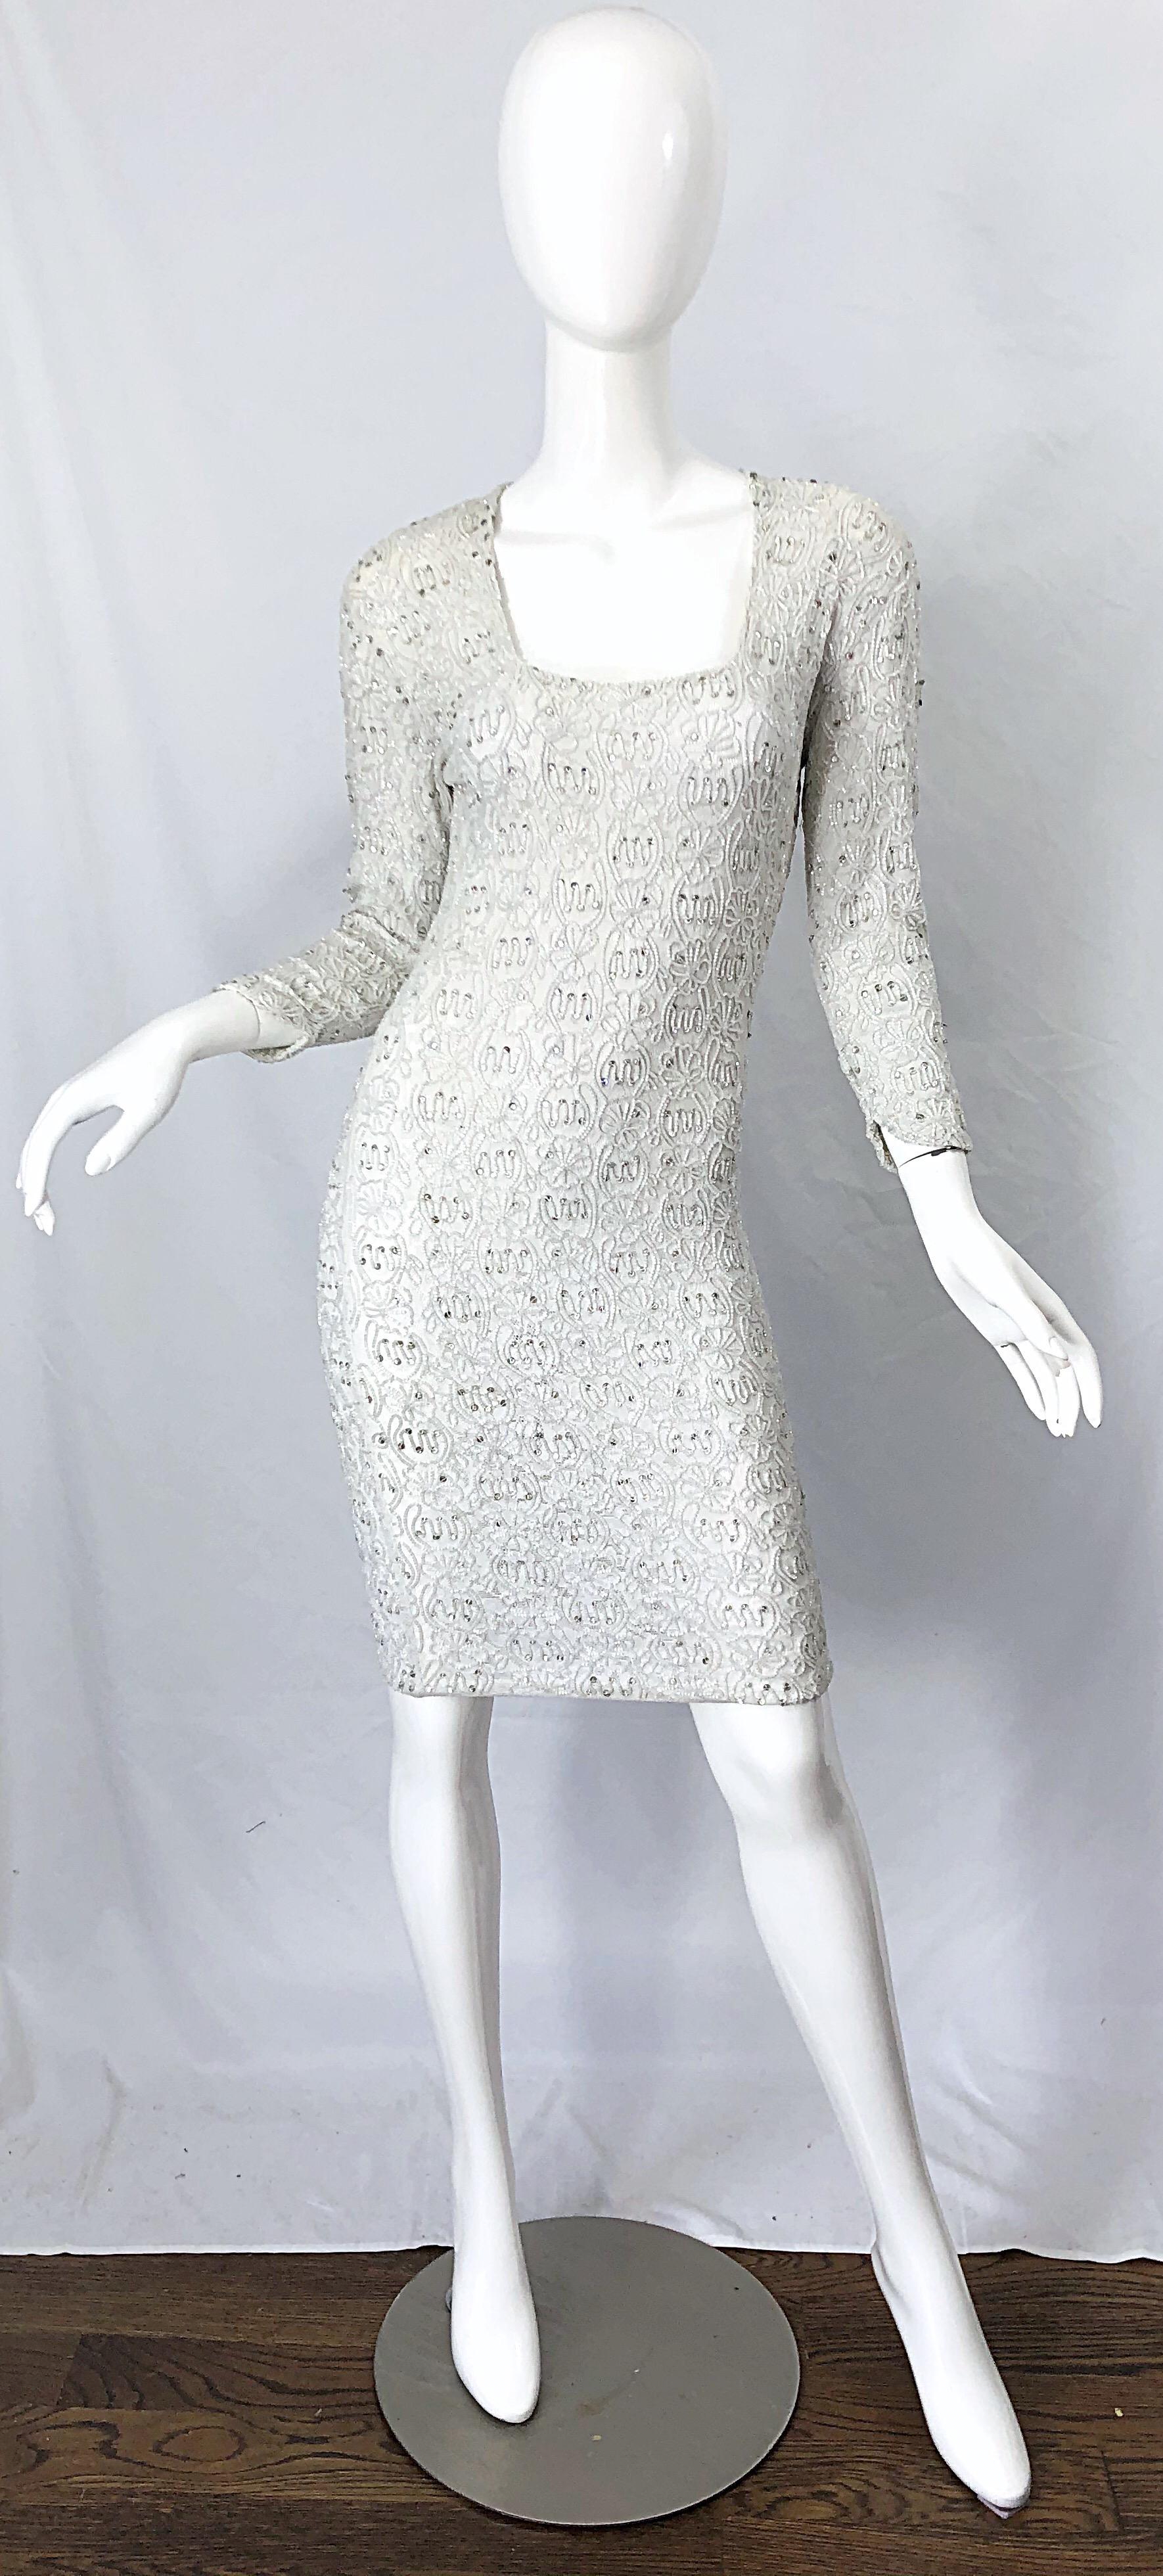 Beautiful vintage 80s GIROGIO di SANT ANGELO white beaded and rhinestone encrusted bodycon dress ! Features a white lace rayon fabric with thousands of hand-sewn sequins, rhinestones, and beads throughout. This dress was from the era when Sant